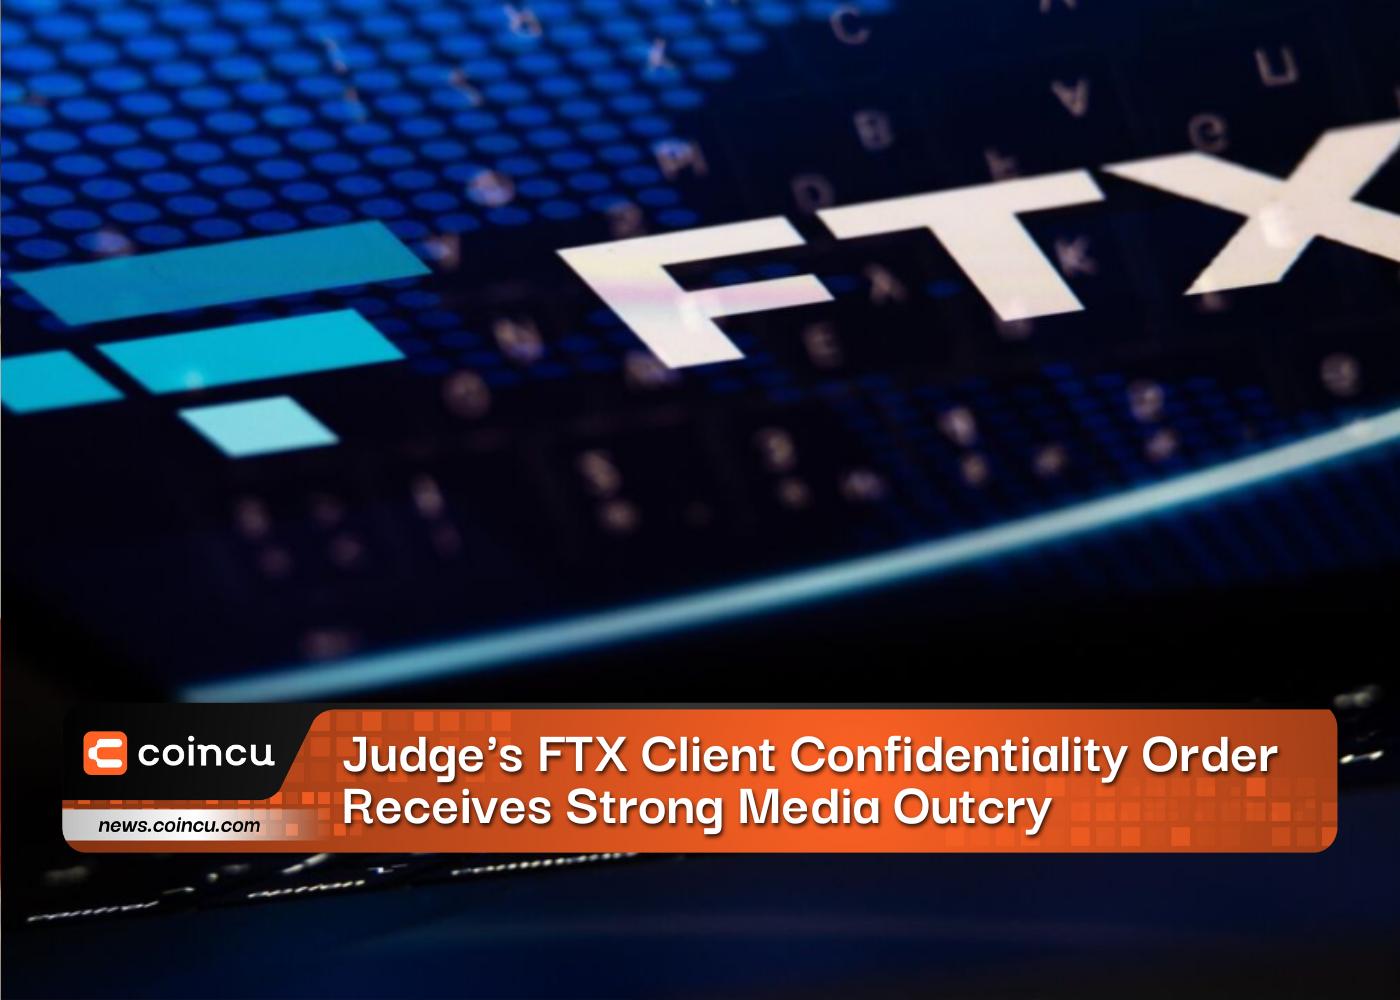 Judge's FTX Client Confidentiality Order Receives Strong Media Outcry